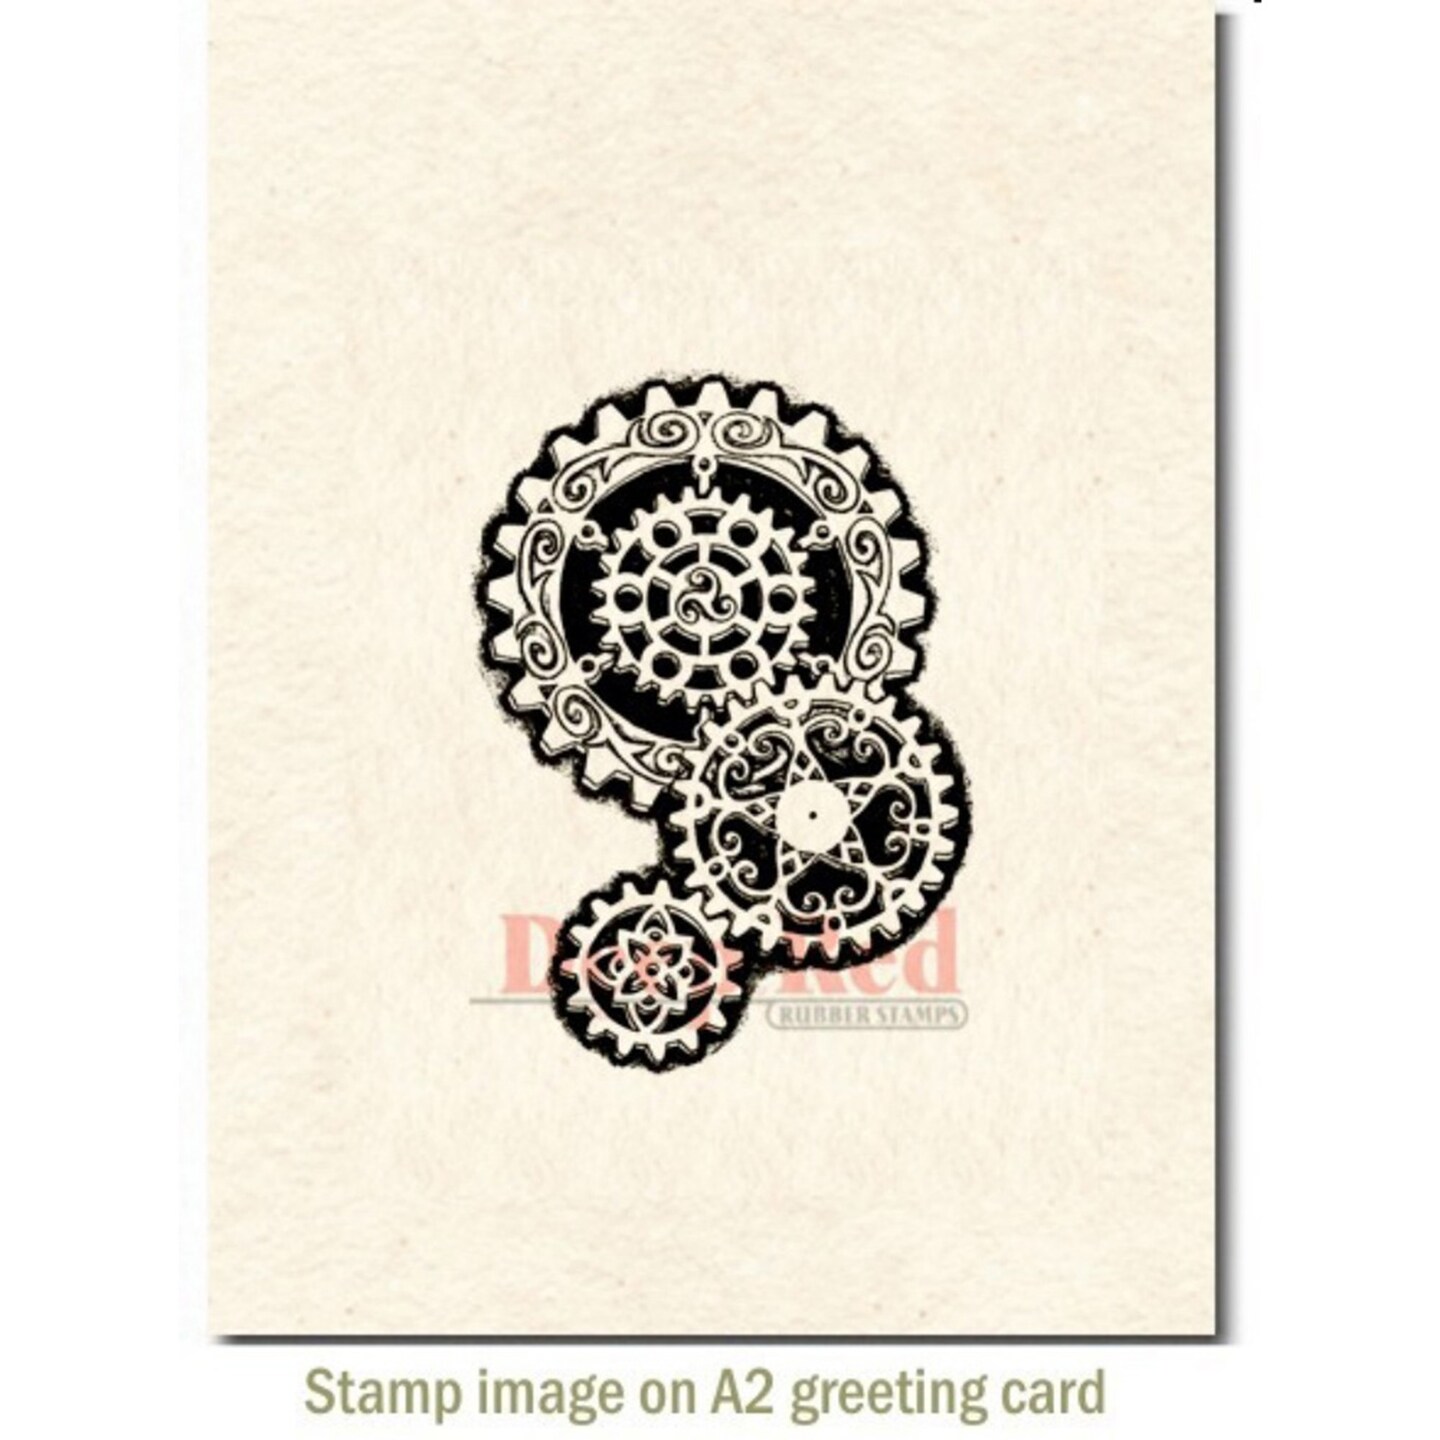 Deep Red Stamps Steampunk Gears Rubber Cling Stamp 2 x 2.8 inches